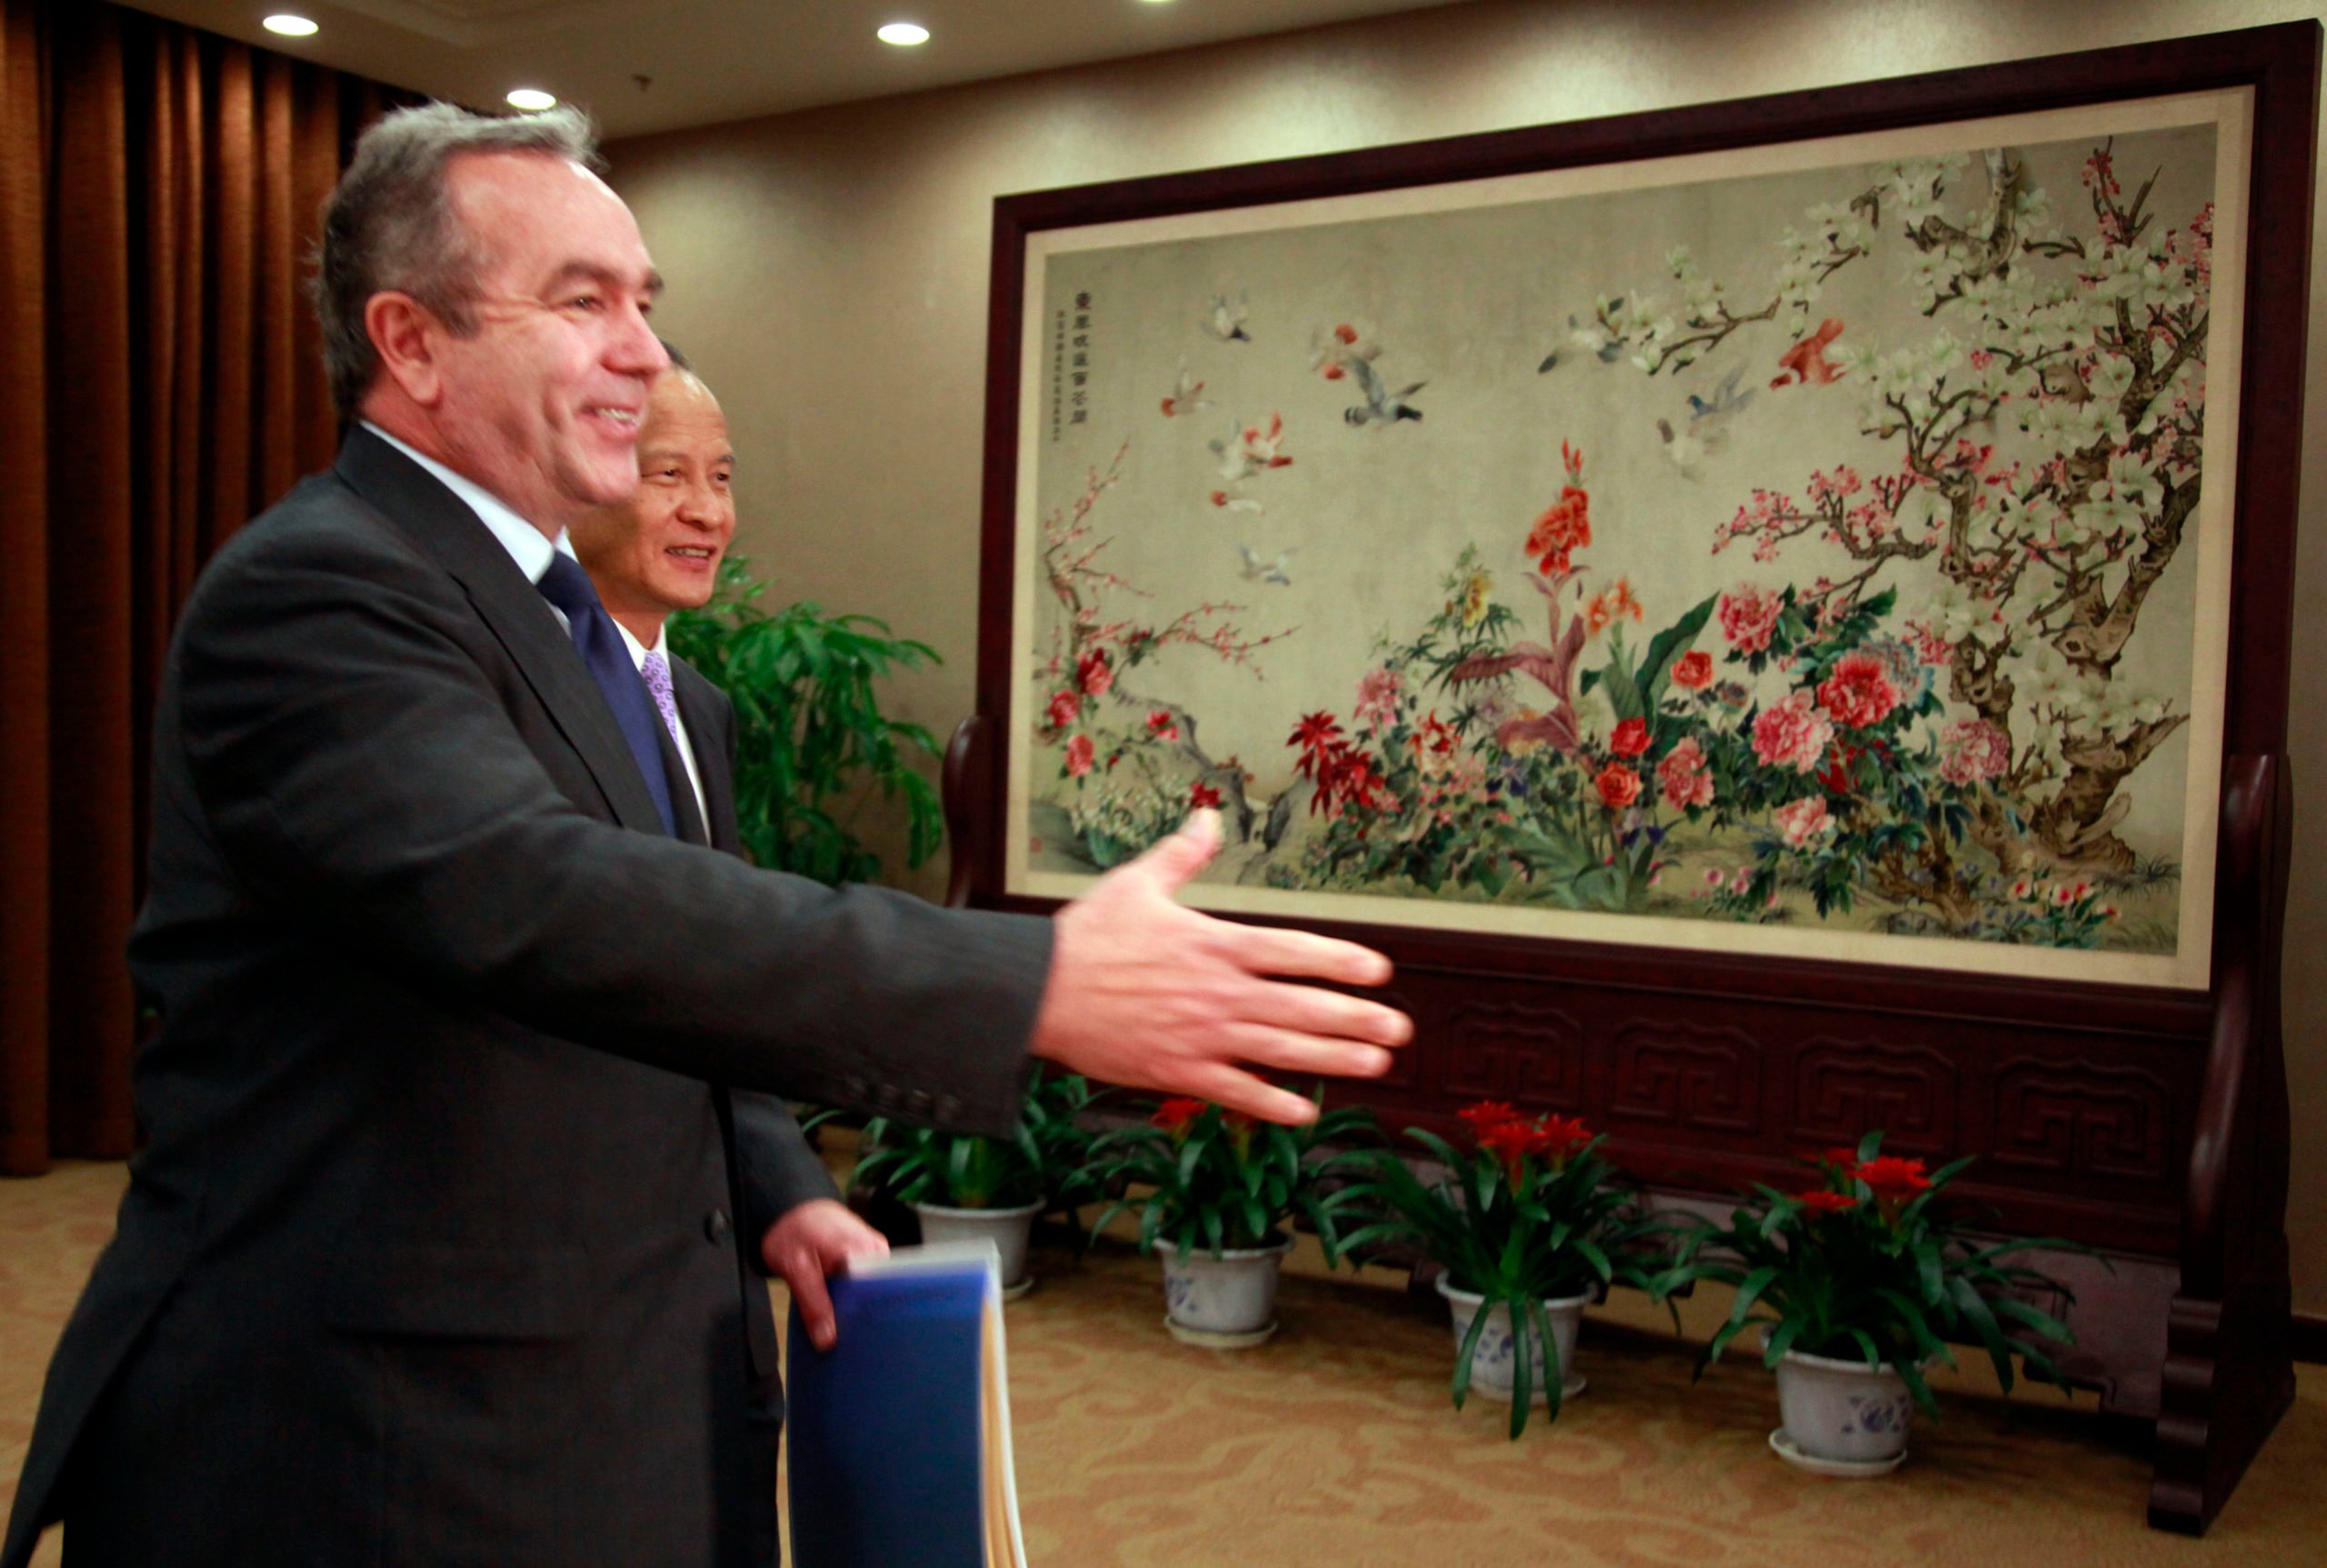 Kurt Campbell, former assistant secretary of state for East Asian and Pacific Affairs prepares to shake hands with China's Vice Foreign Minister Cui Tiankai before a meeting at the Chinese Foreign Ministry in Beijing on Oct. 11, 2011. (Ng Han Guan/AFP via Getty Images)